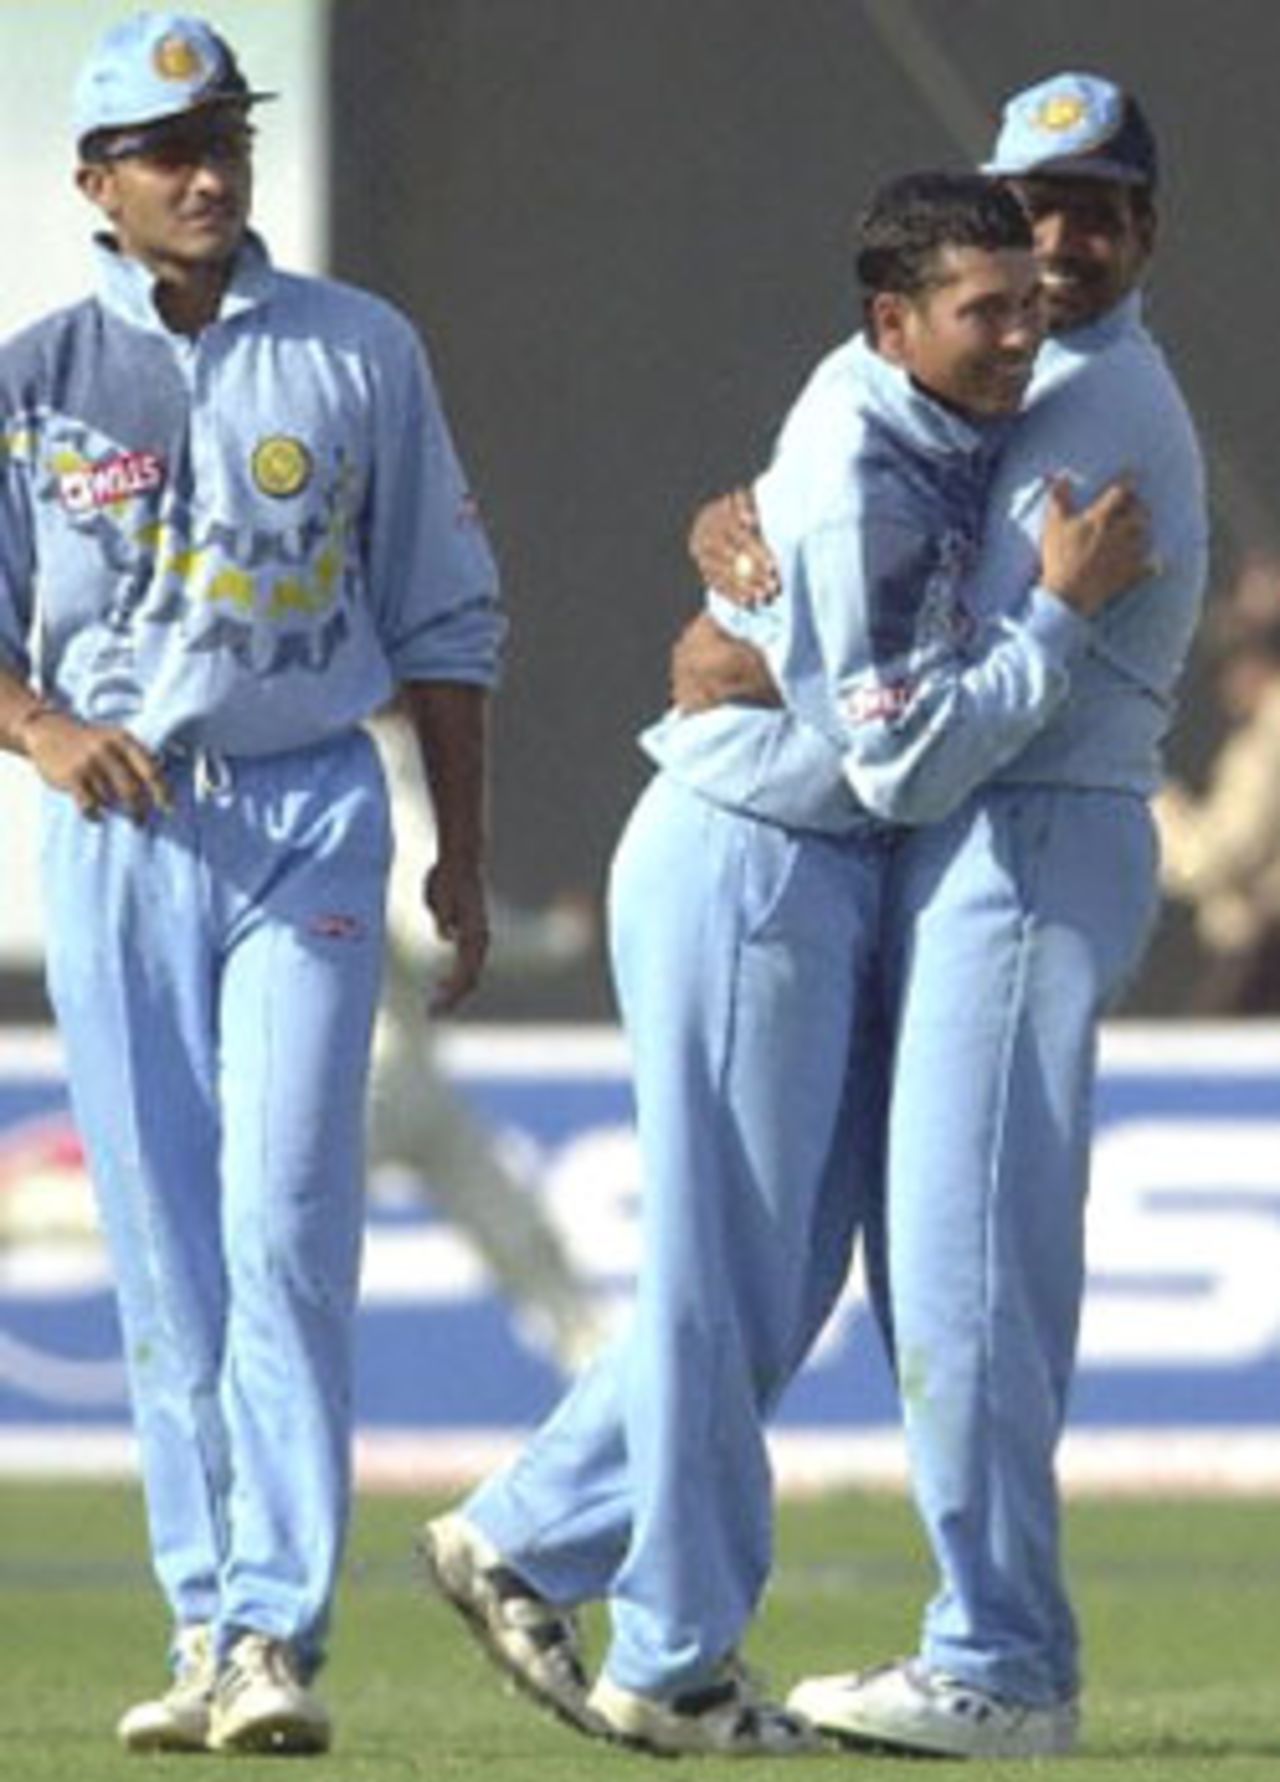 Former Indian captain Sachin Tendulkar (C) being congratulated by team-mate Sunil Joshi (R) after Tendulkar claimed the important wicket of South African captain Hansie Cronjie, as team captain Sourav Ganguly (L) walks past during the third one-day international cricket match between South Africa and India played at Faridabad, 15 March 2000. Tendulkar went on to take four wickets but could not prevent India from losing to South Africa by two wickets. The five match series stands at 2-1 in favour of India.